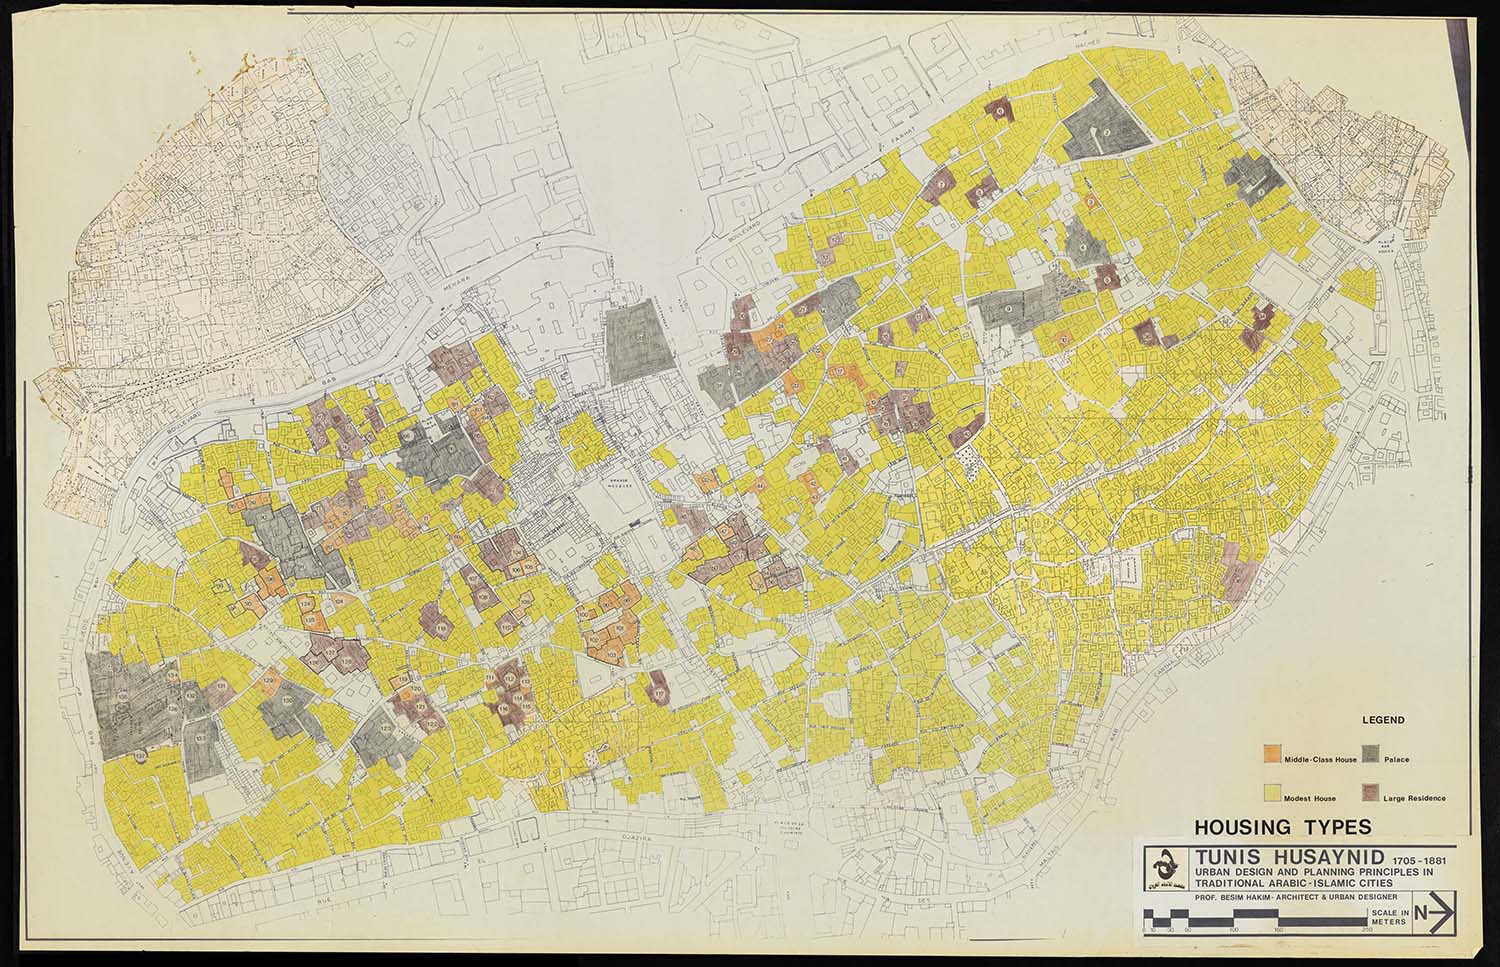 Tunis  - Map of historic center of Tunis showing housing types. Different scales of homes (modest, middle-class, large, and palatine) are color coded according to the key at bottom right. Scale: 1:1,000 m. This map is part of a&nbsp;<a href="https://archnet.org/collections/1762" target="_blank" data-bypass="true">series of maps</a><span style="text-align: justify;">&nbsp;titled "Tunis Husaynid (1705-1881): Urban Design and Planning Principles in Traditional Arabic-Islamic Cities." Produced by Besim S. Hakim.</span>